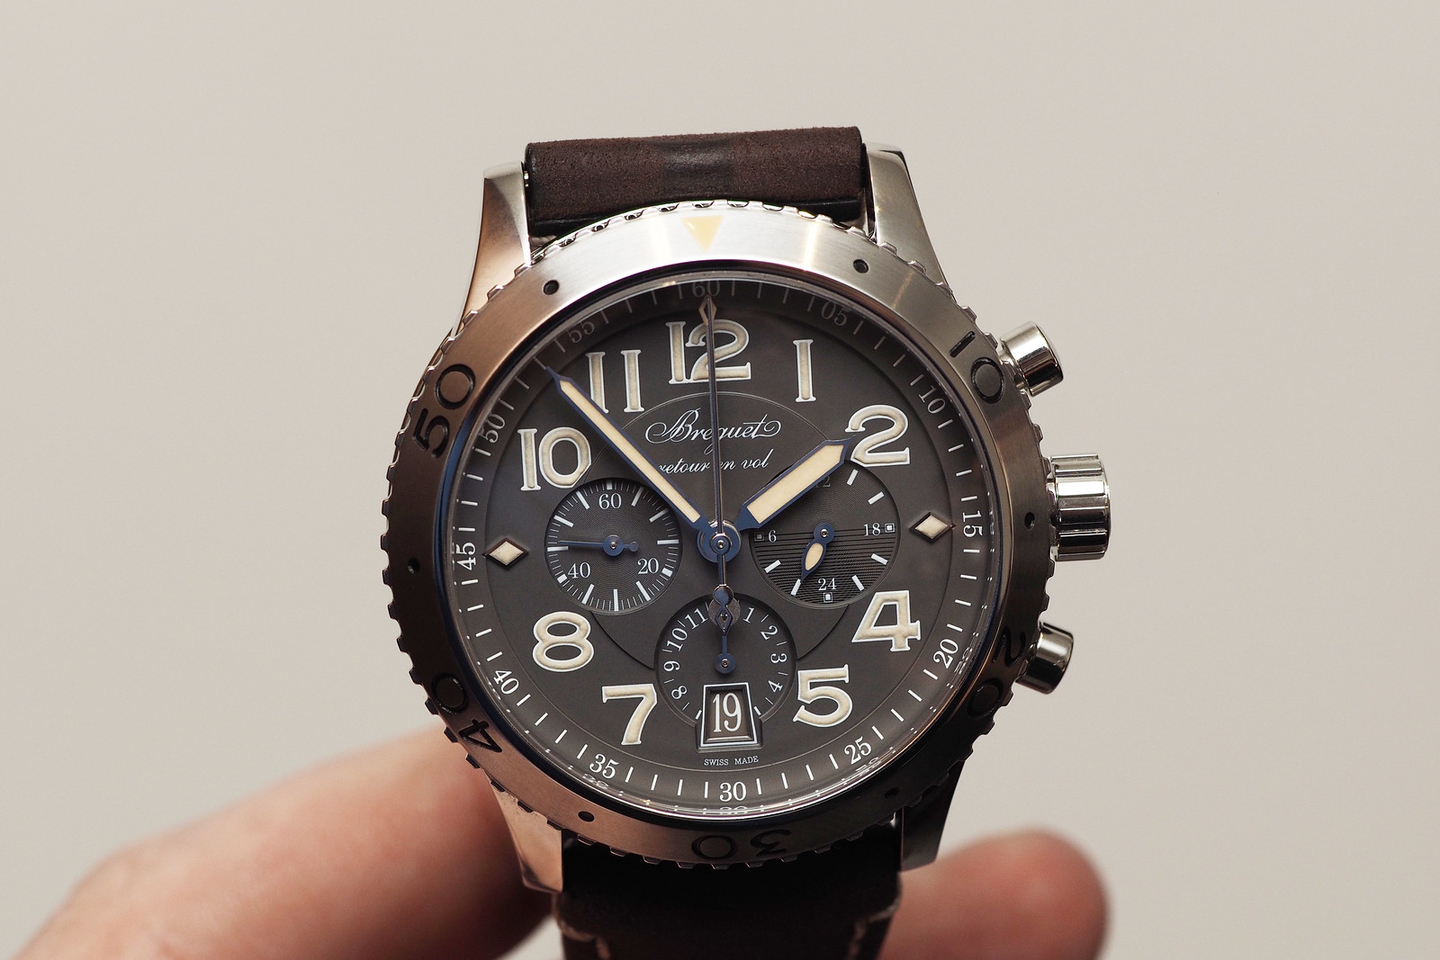 The High Quality Breguet Type XXI 3817 Hands-On